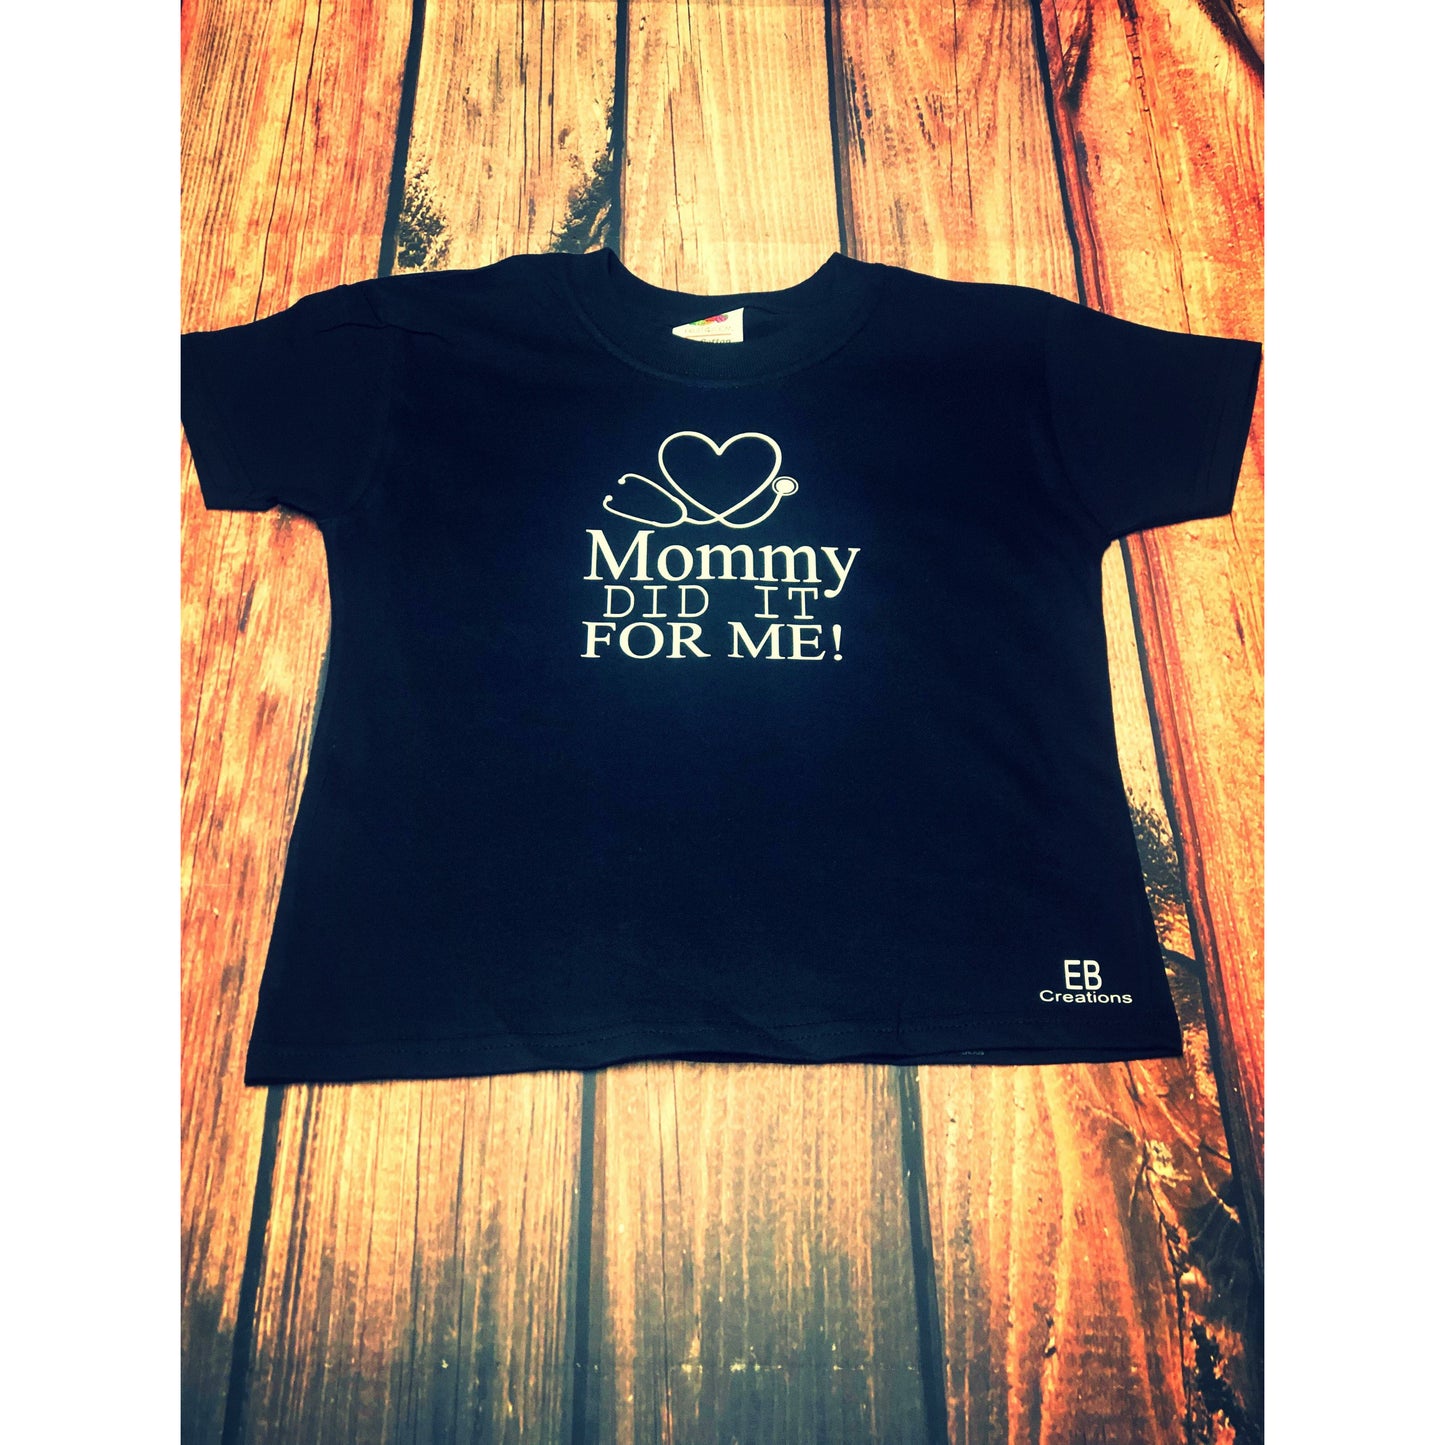 Mommy did it for me t-shirt - Eb Creations Mommy did it for me t-shirt